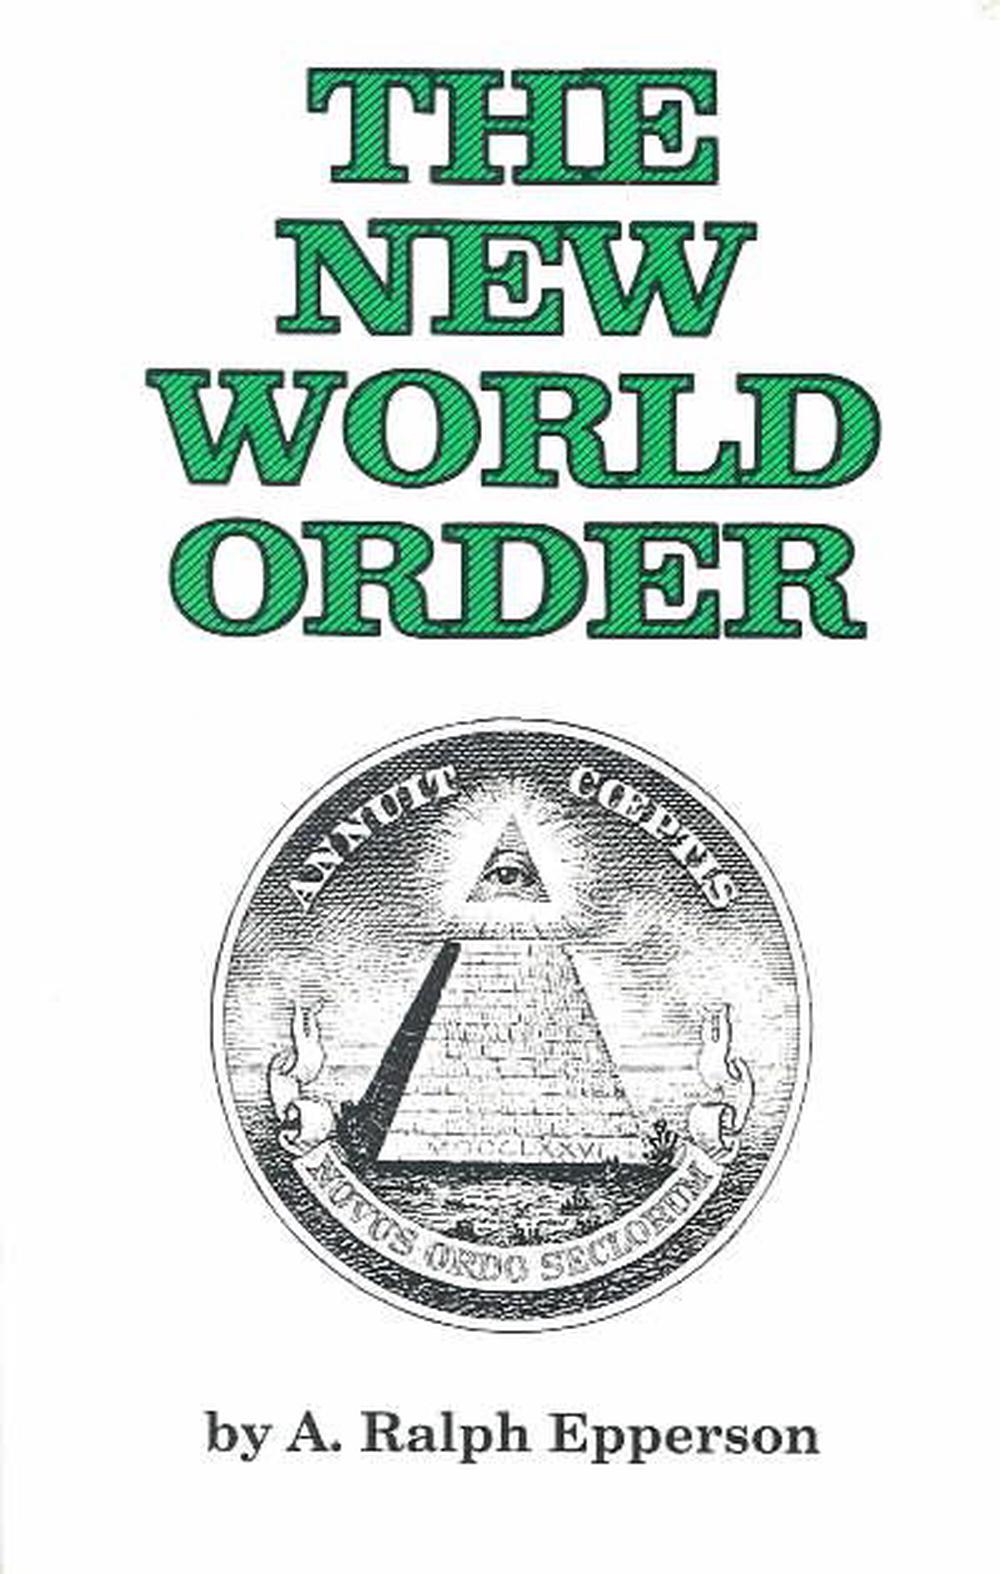 research papers about new world order